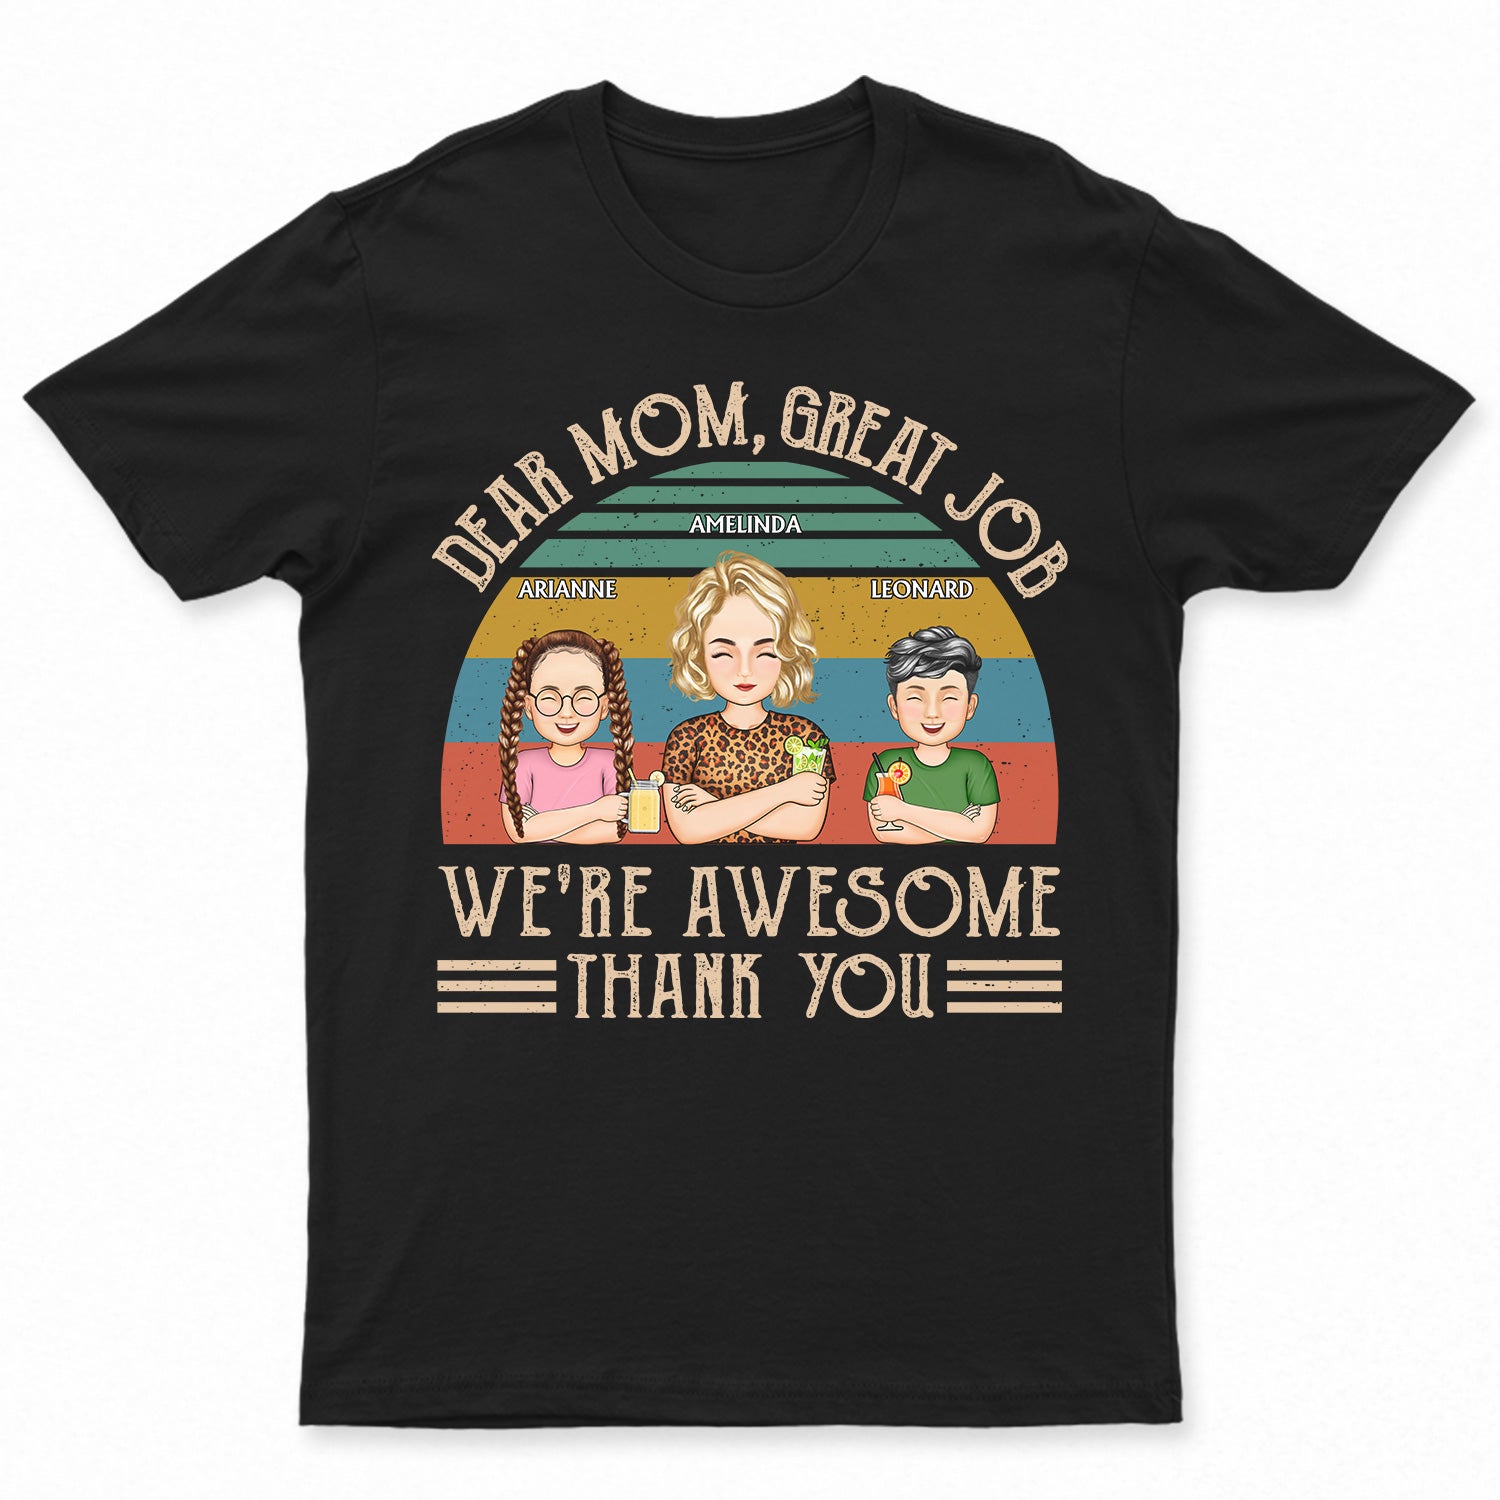 Dear Mom Great Job We're Awesome Thank You Young Cartoon - Birthday, Loving Gift For Mother, Grandma, Grandmother - Personalized Custom T Shirt